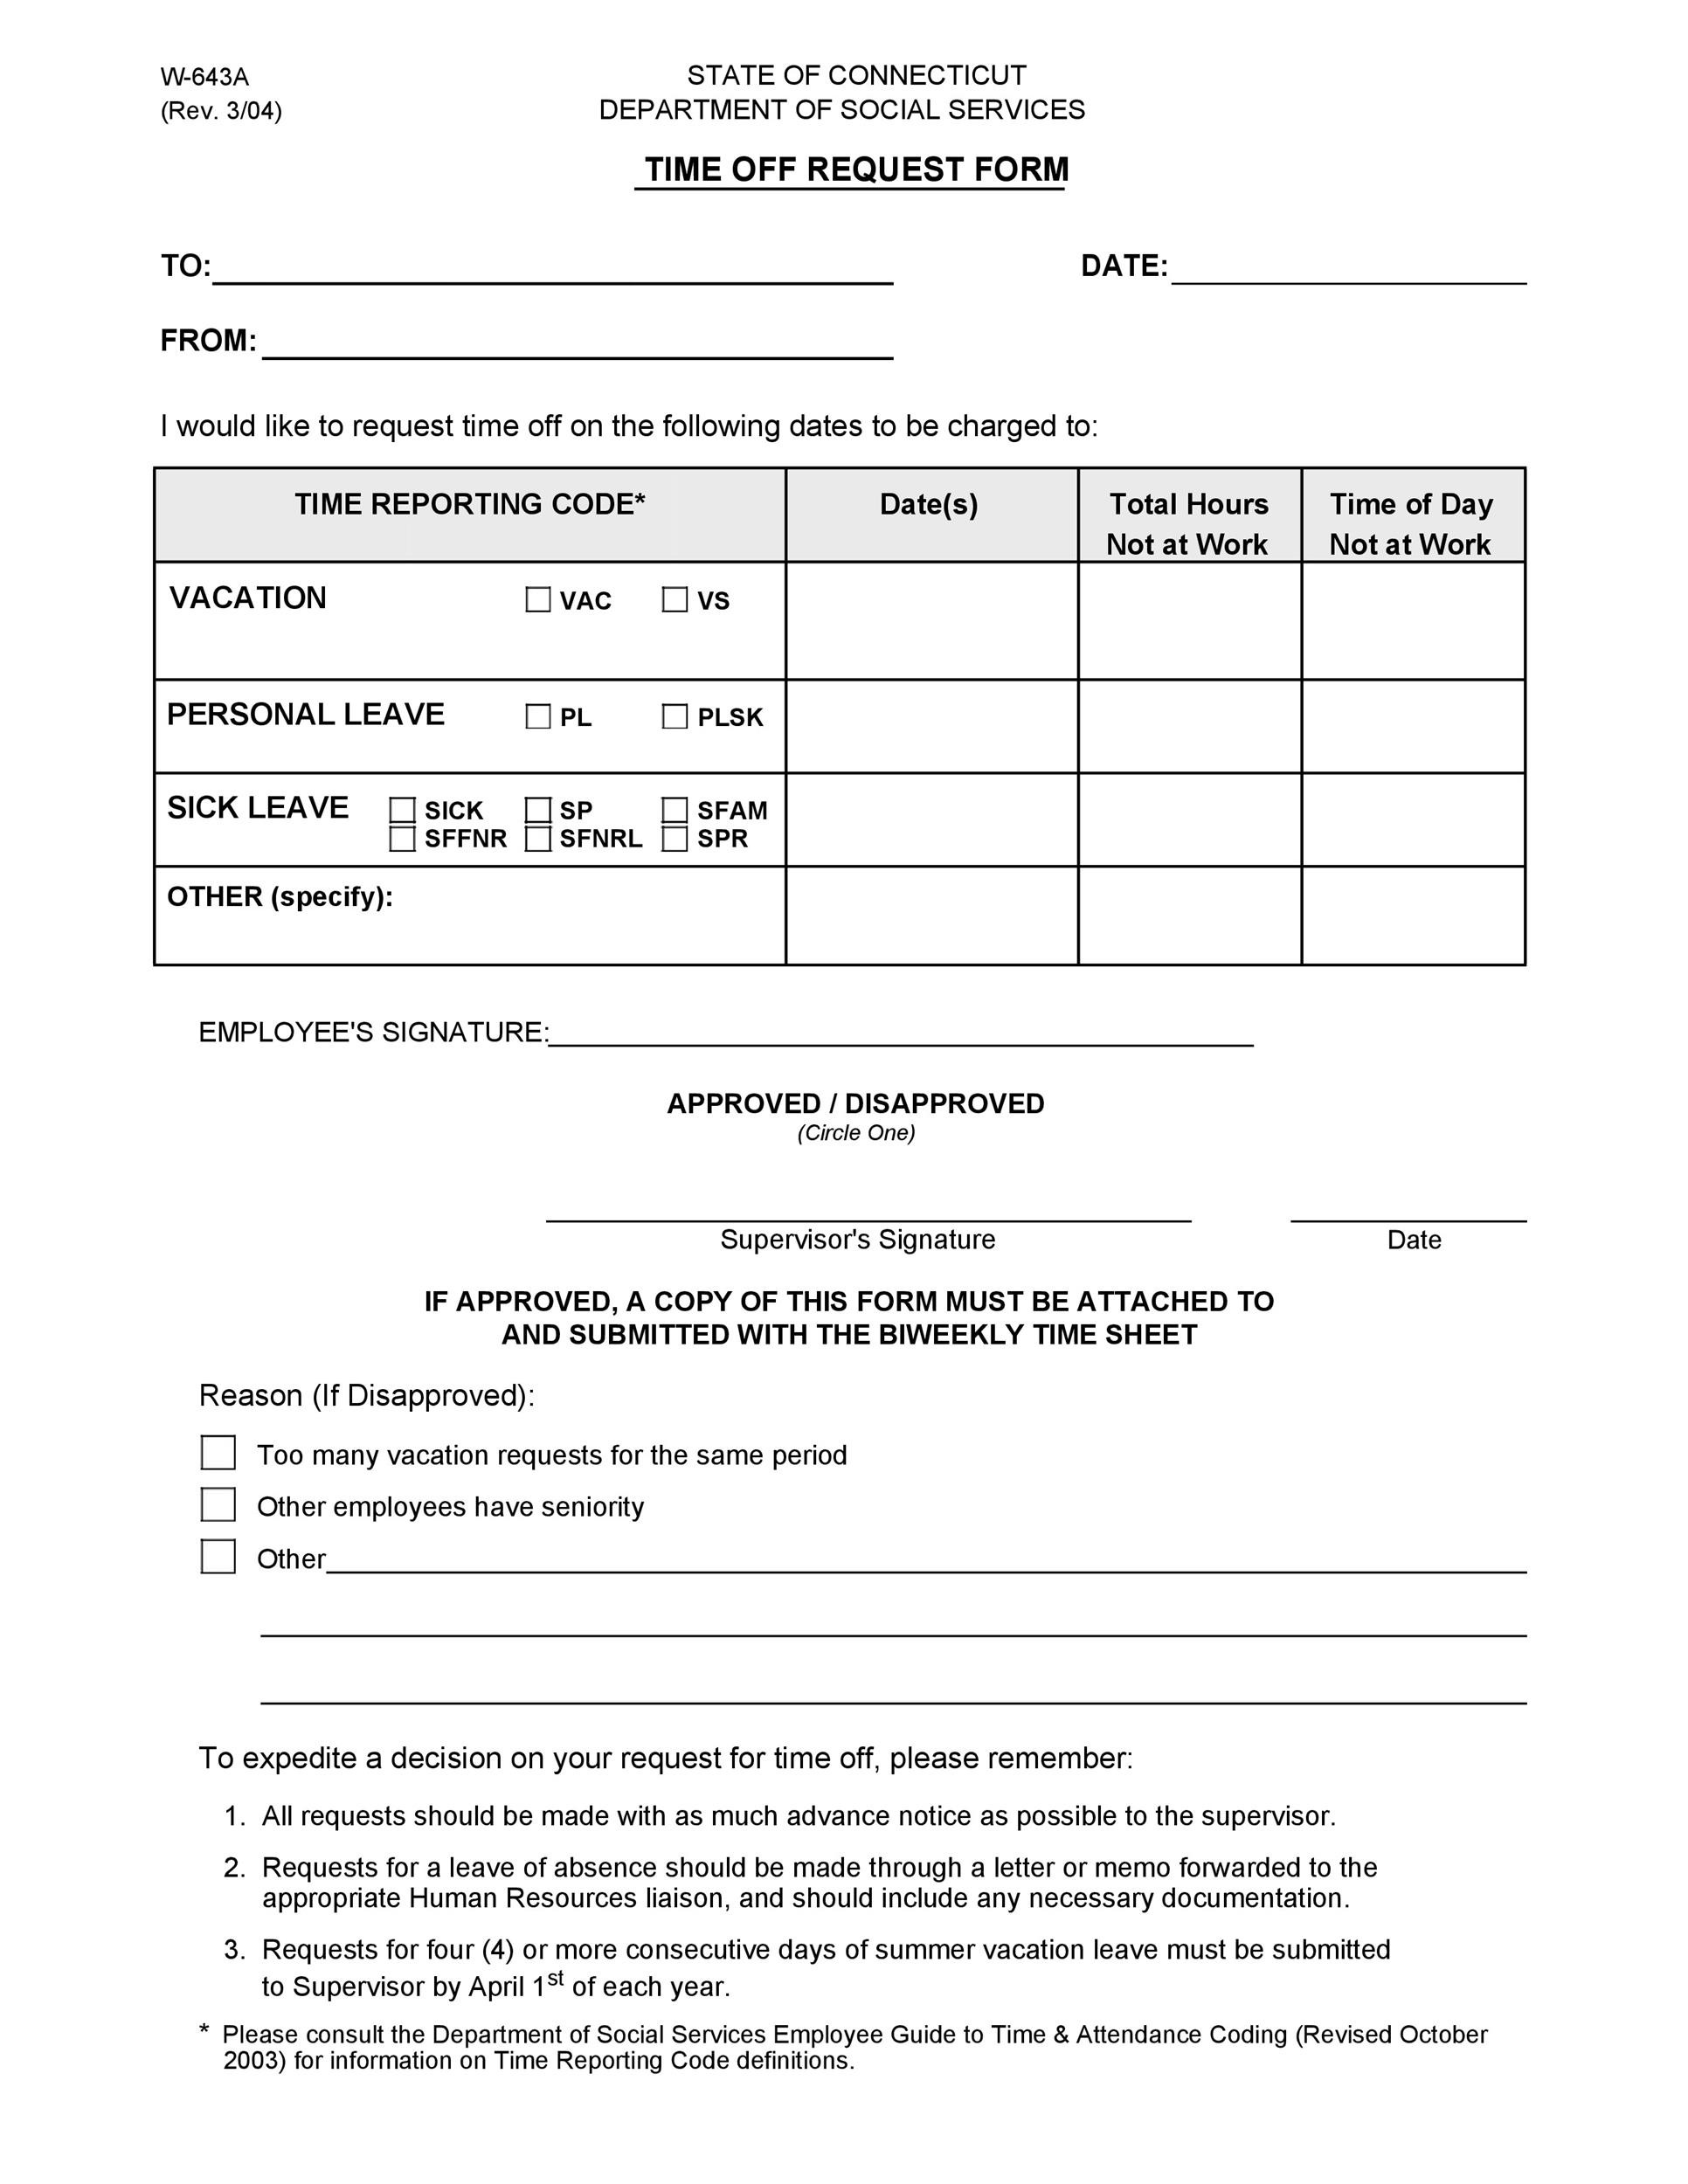 40+ Effective Time Off Request Forms & Templates ᐅ TemplateLab